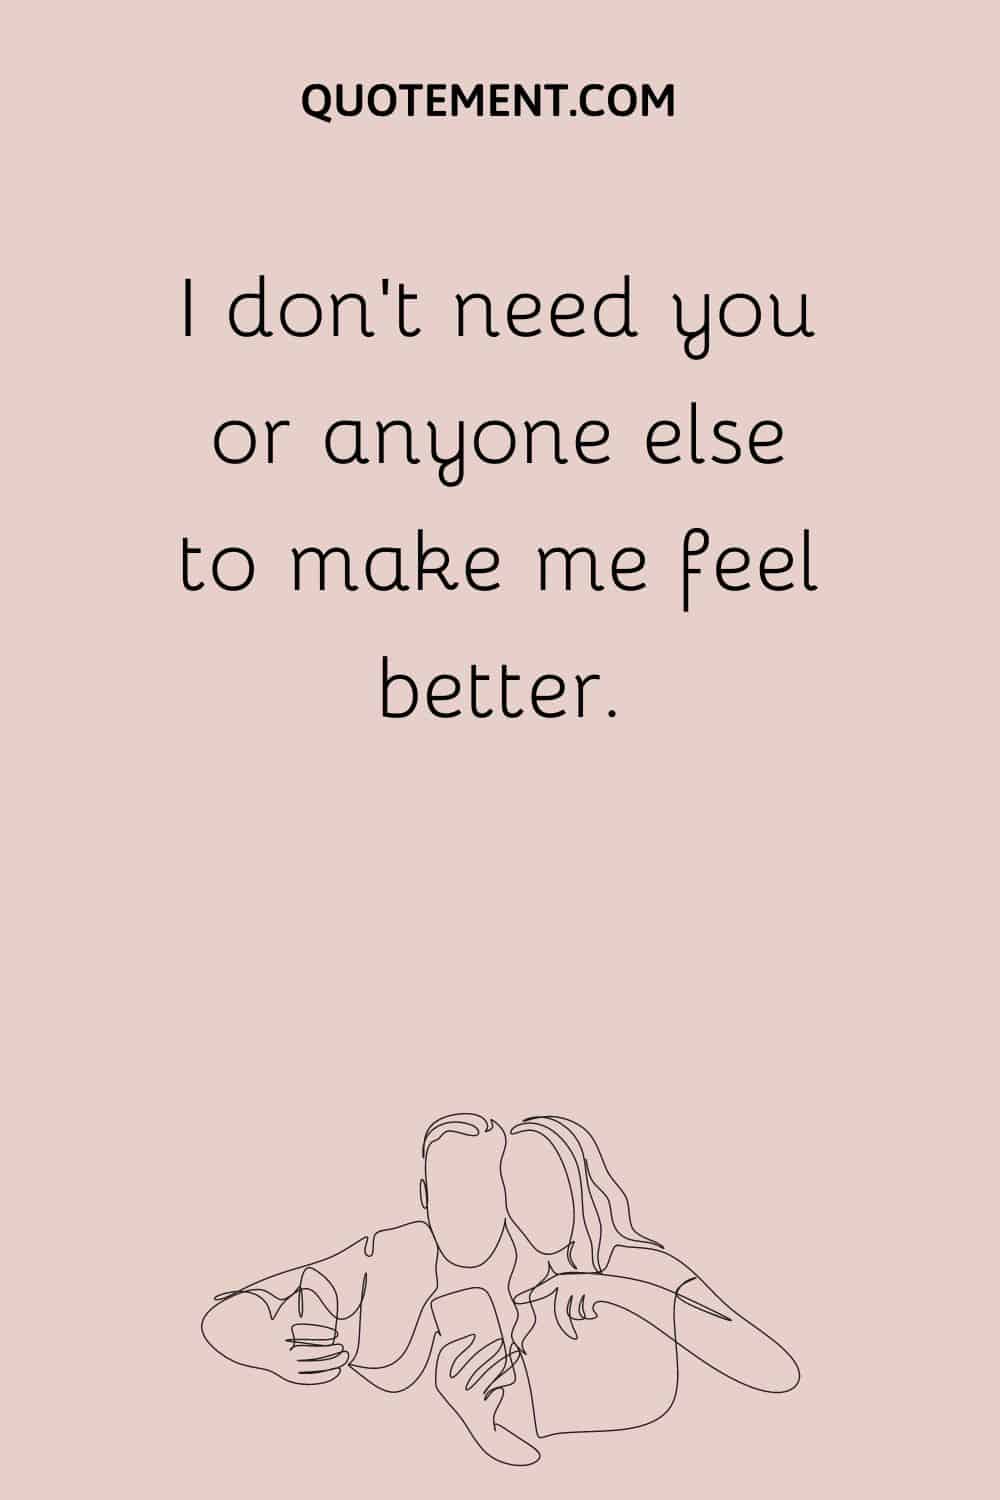 I don't need you or anyone else to make me feel better